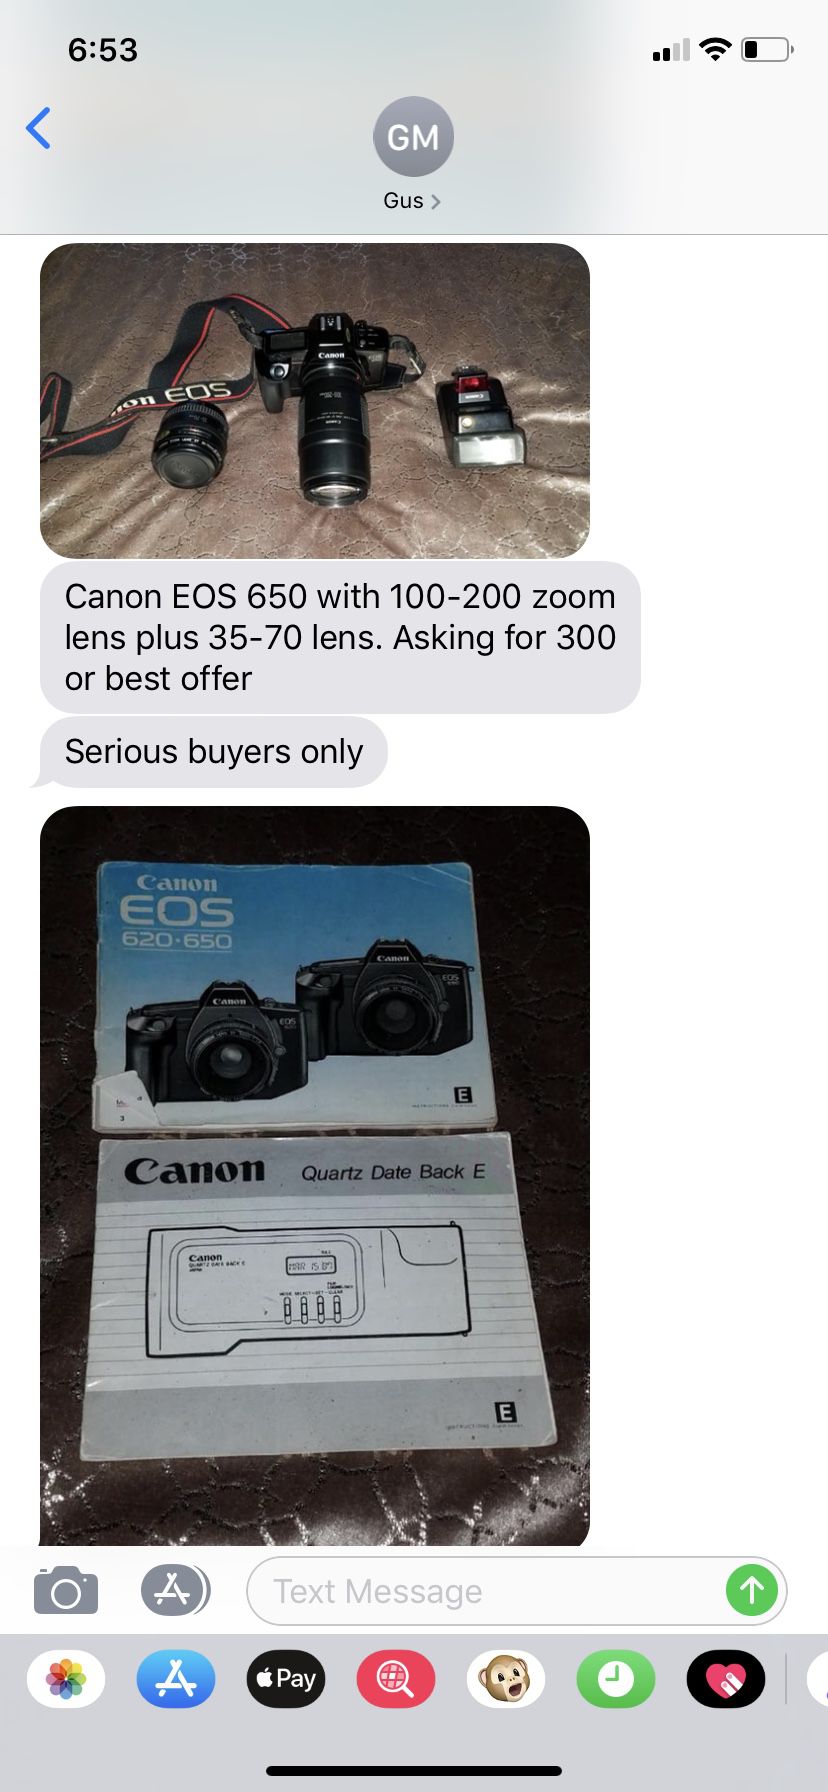 Canon full camera equipment and in excellent working condition